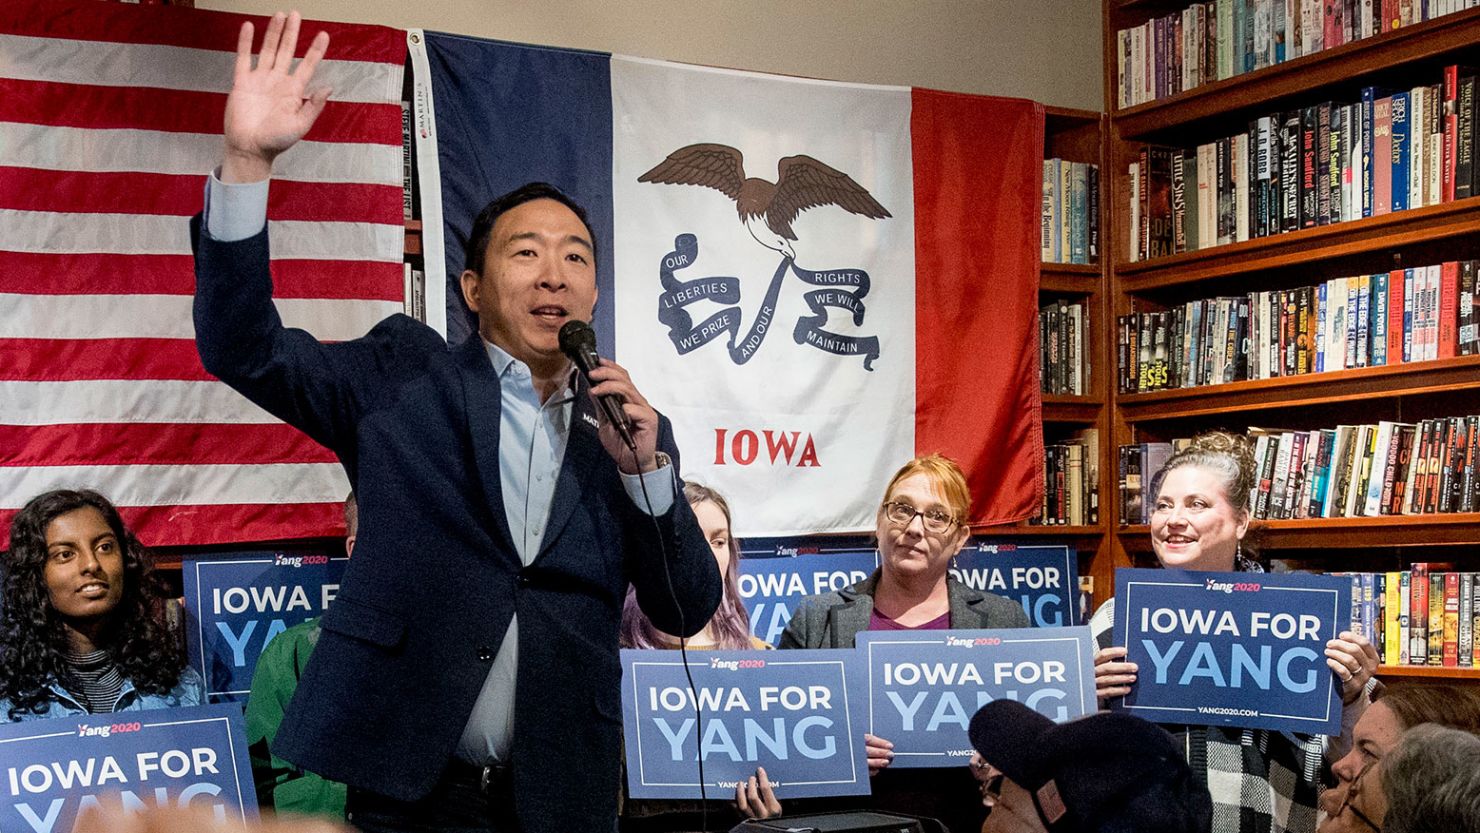 Democratic presidential candidate Andrew Yang speaks at a campaign rally at the Brewed Book, Monday, Jan. 6, 2020, in Davenport, Iowa. (AP Photo/Andrew Harnik)